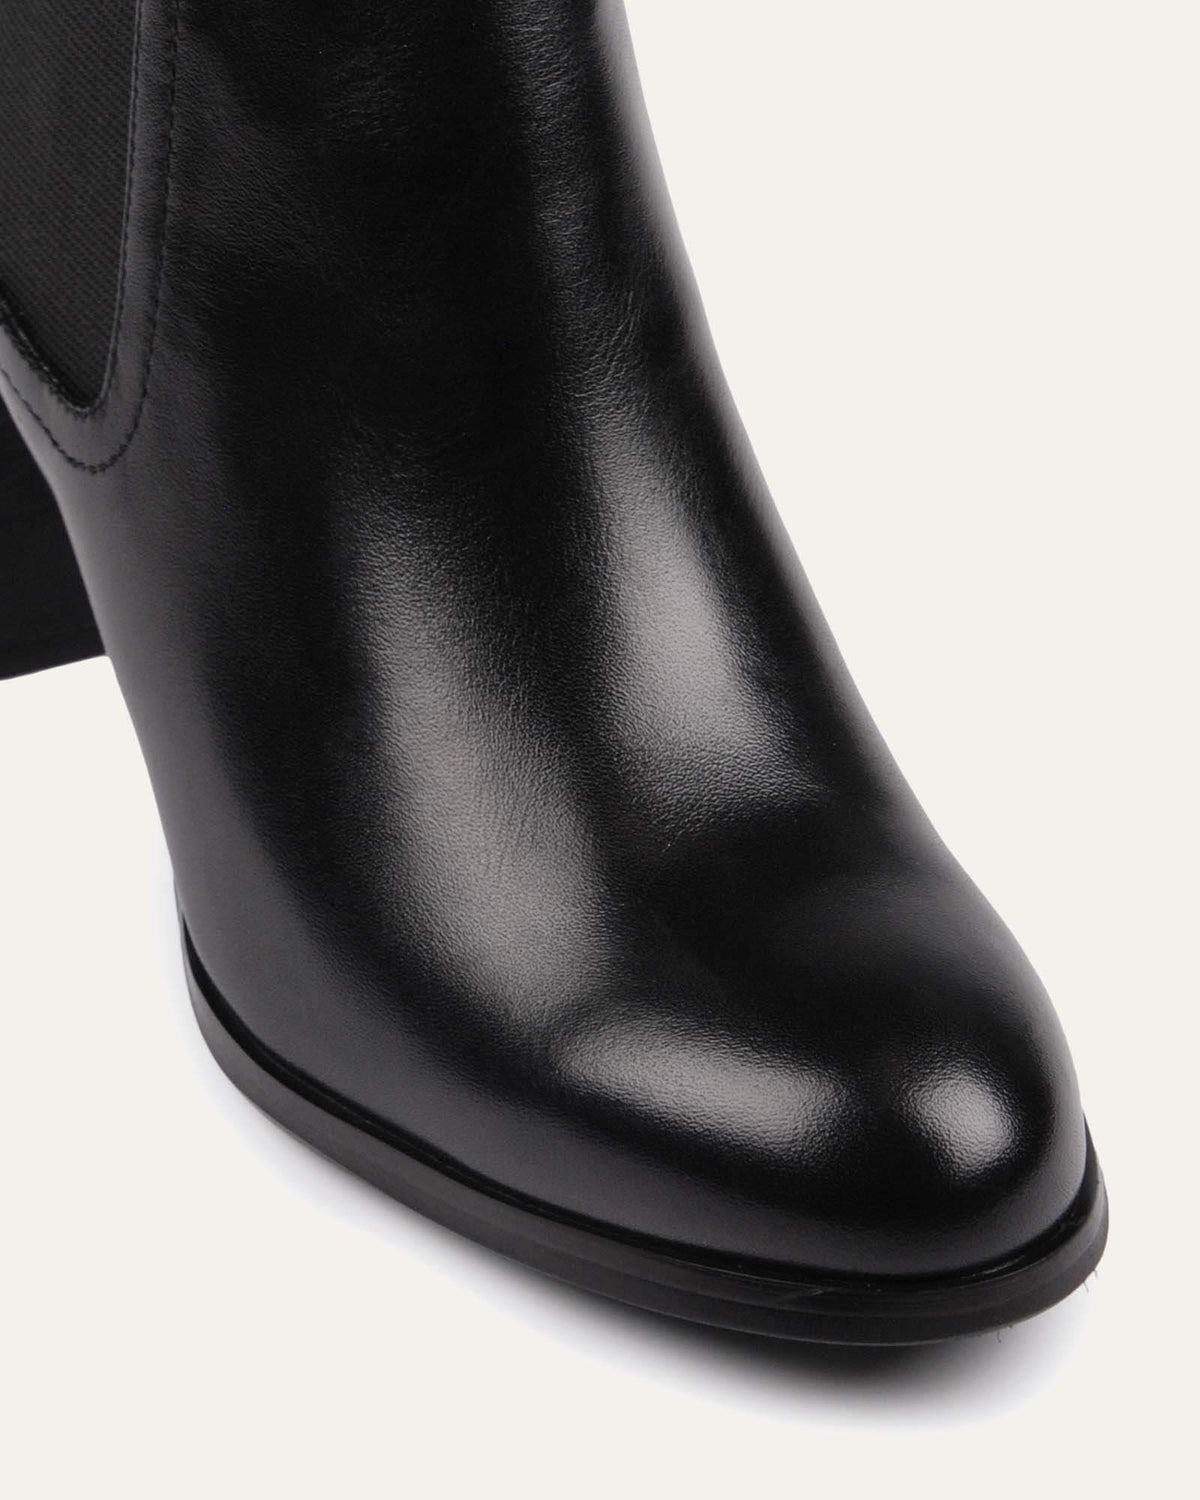 FRANCO MID ANKLE BOOTS BLACK LEATHER